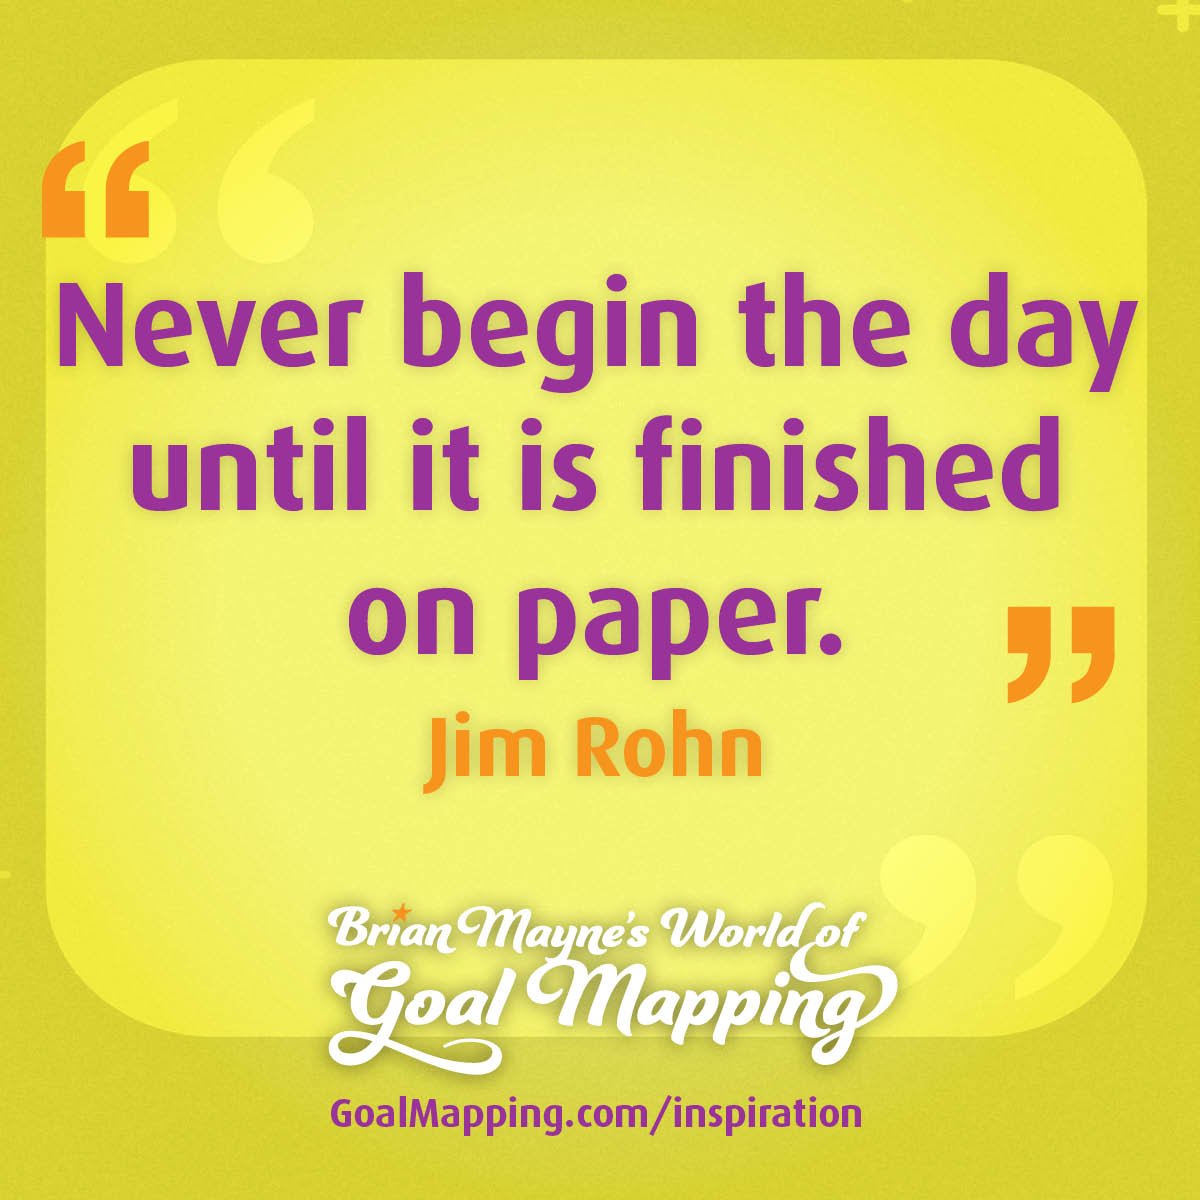 "Never begin the day until it is finished on paper." Jim Rohn